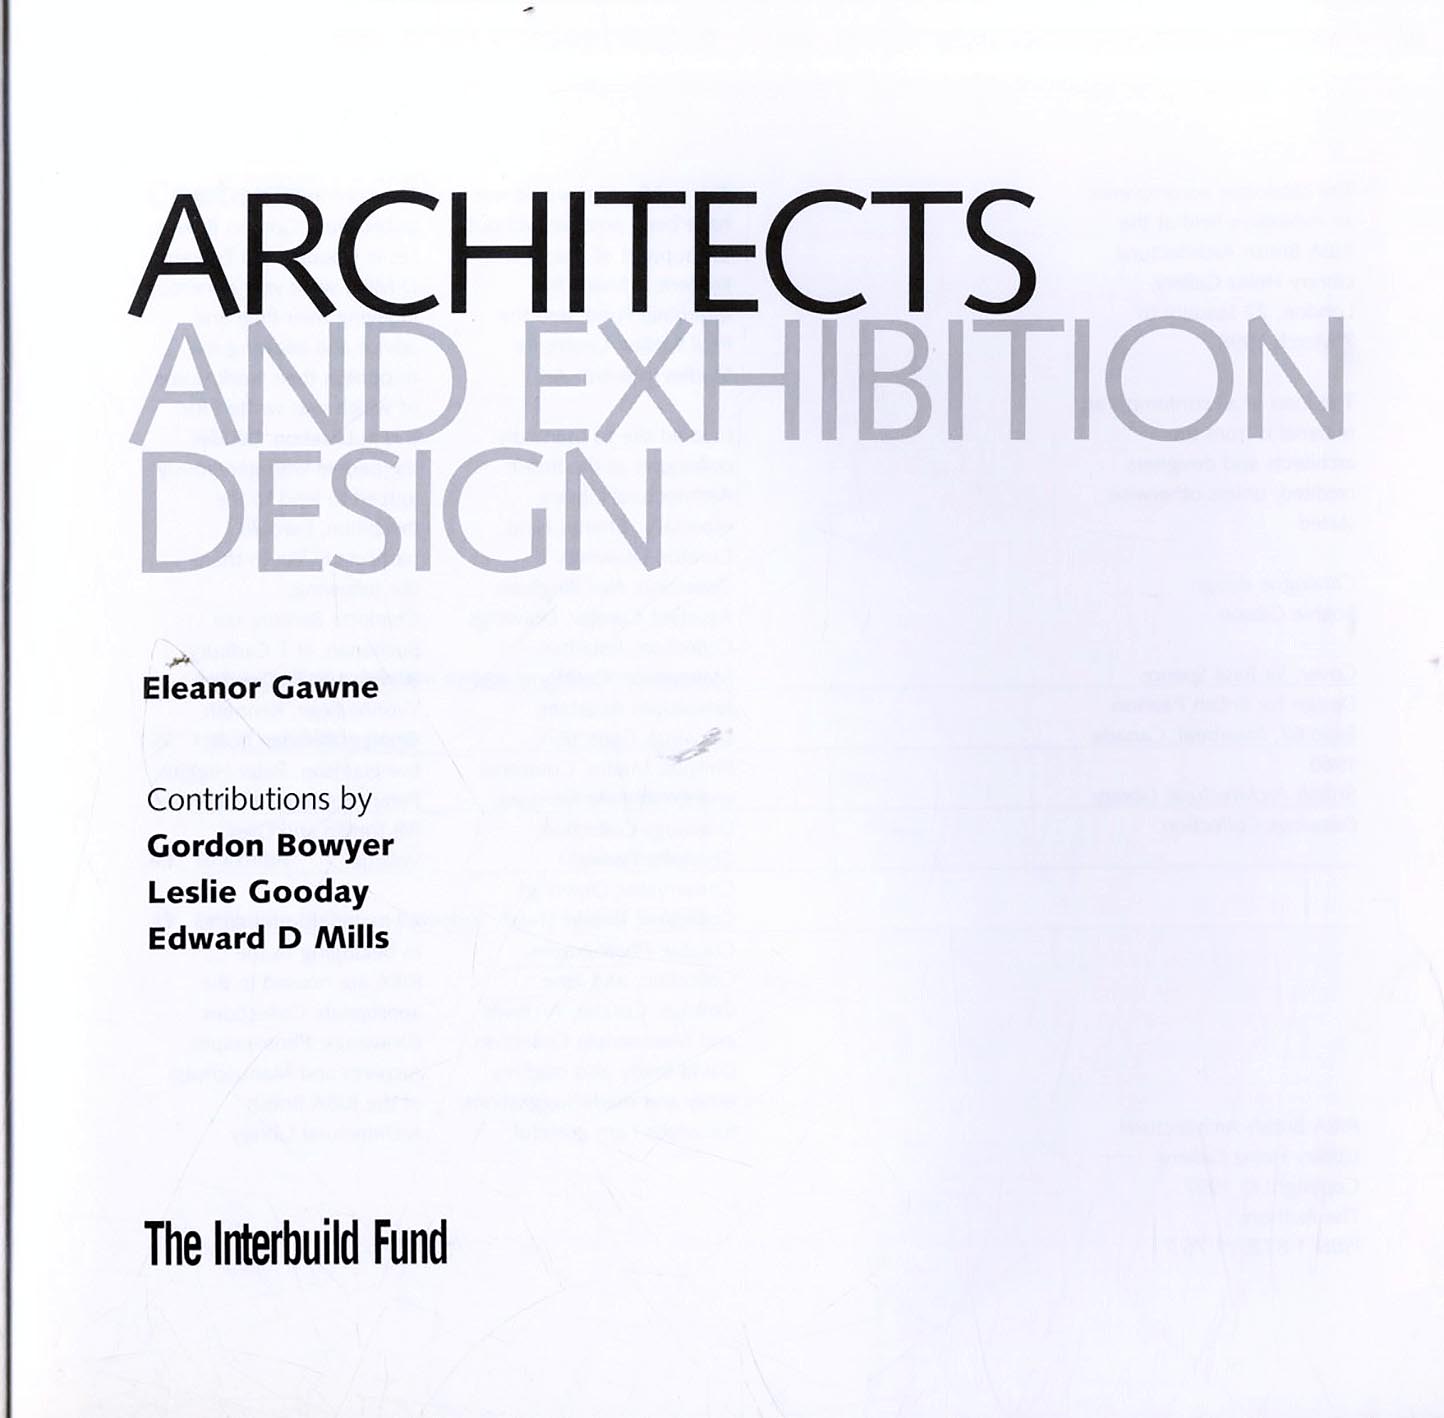 Architects and Exhibition Design, exhibition catalogue,